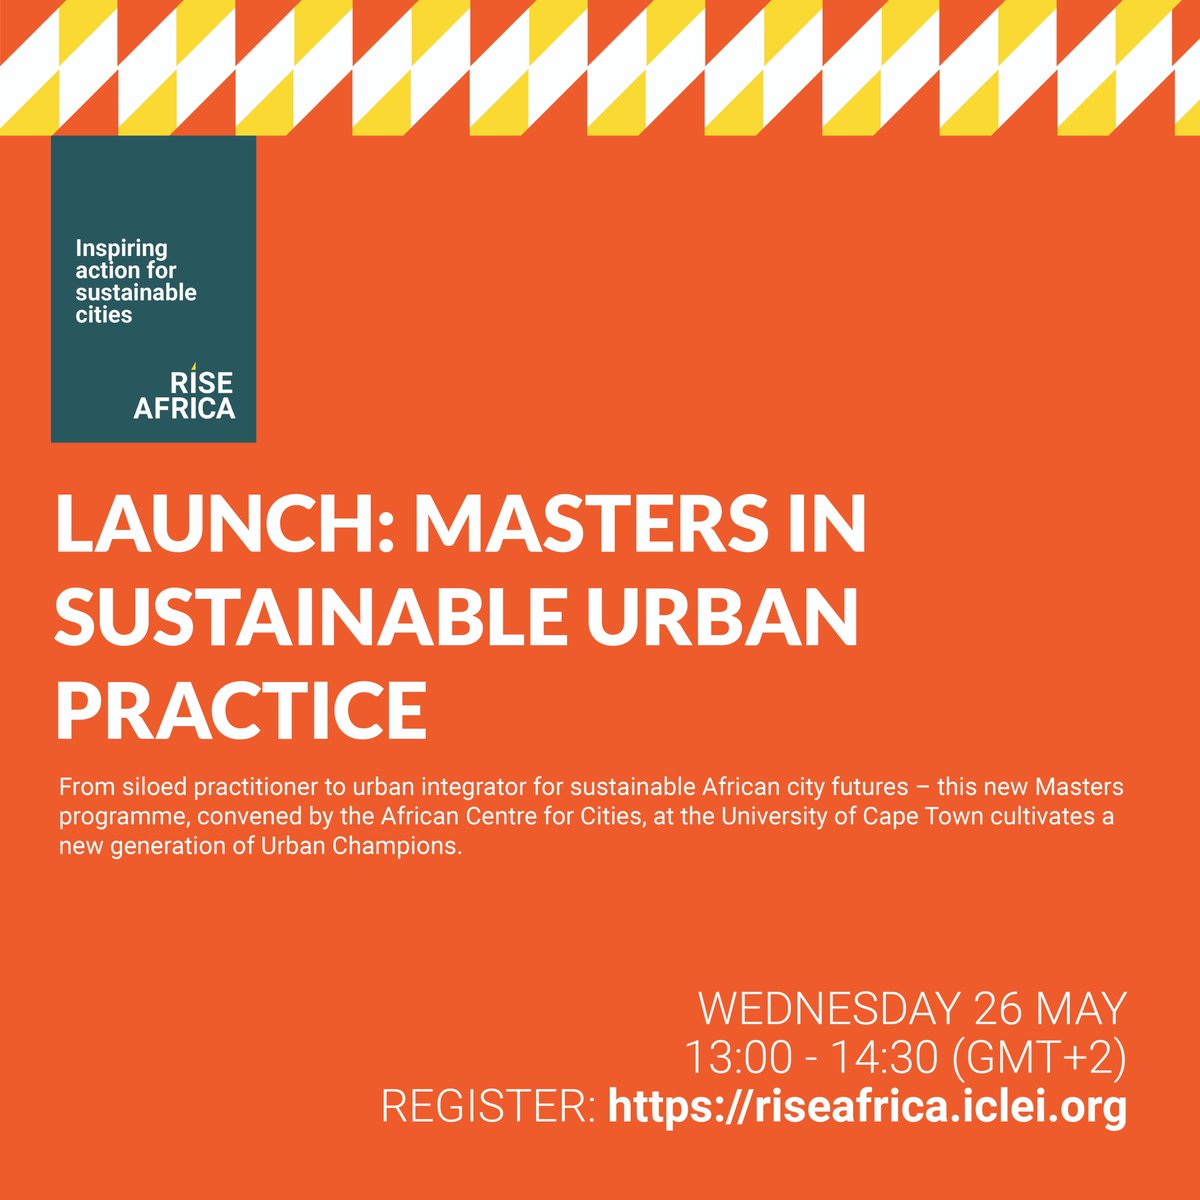 INVITE | ACC is very excited to invite you to the launch of the new Masters in Sustainable Urban Practice as part of the forthcoming @ICLEIAfrica #RISEAfrica2021 #ActionFestival . REGISTER HERE | bit.ly/3u2MCNO #FutureAfricanCities #NextUrbanChampions* #MSUP